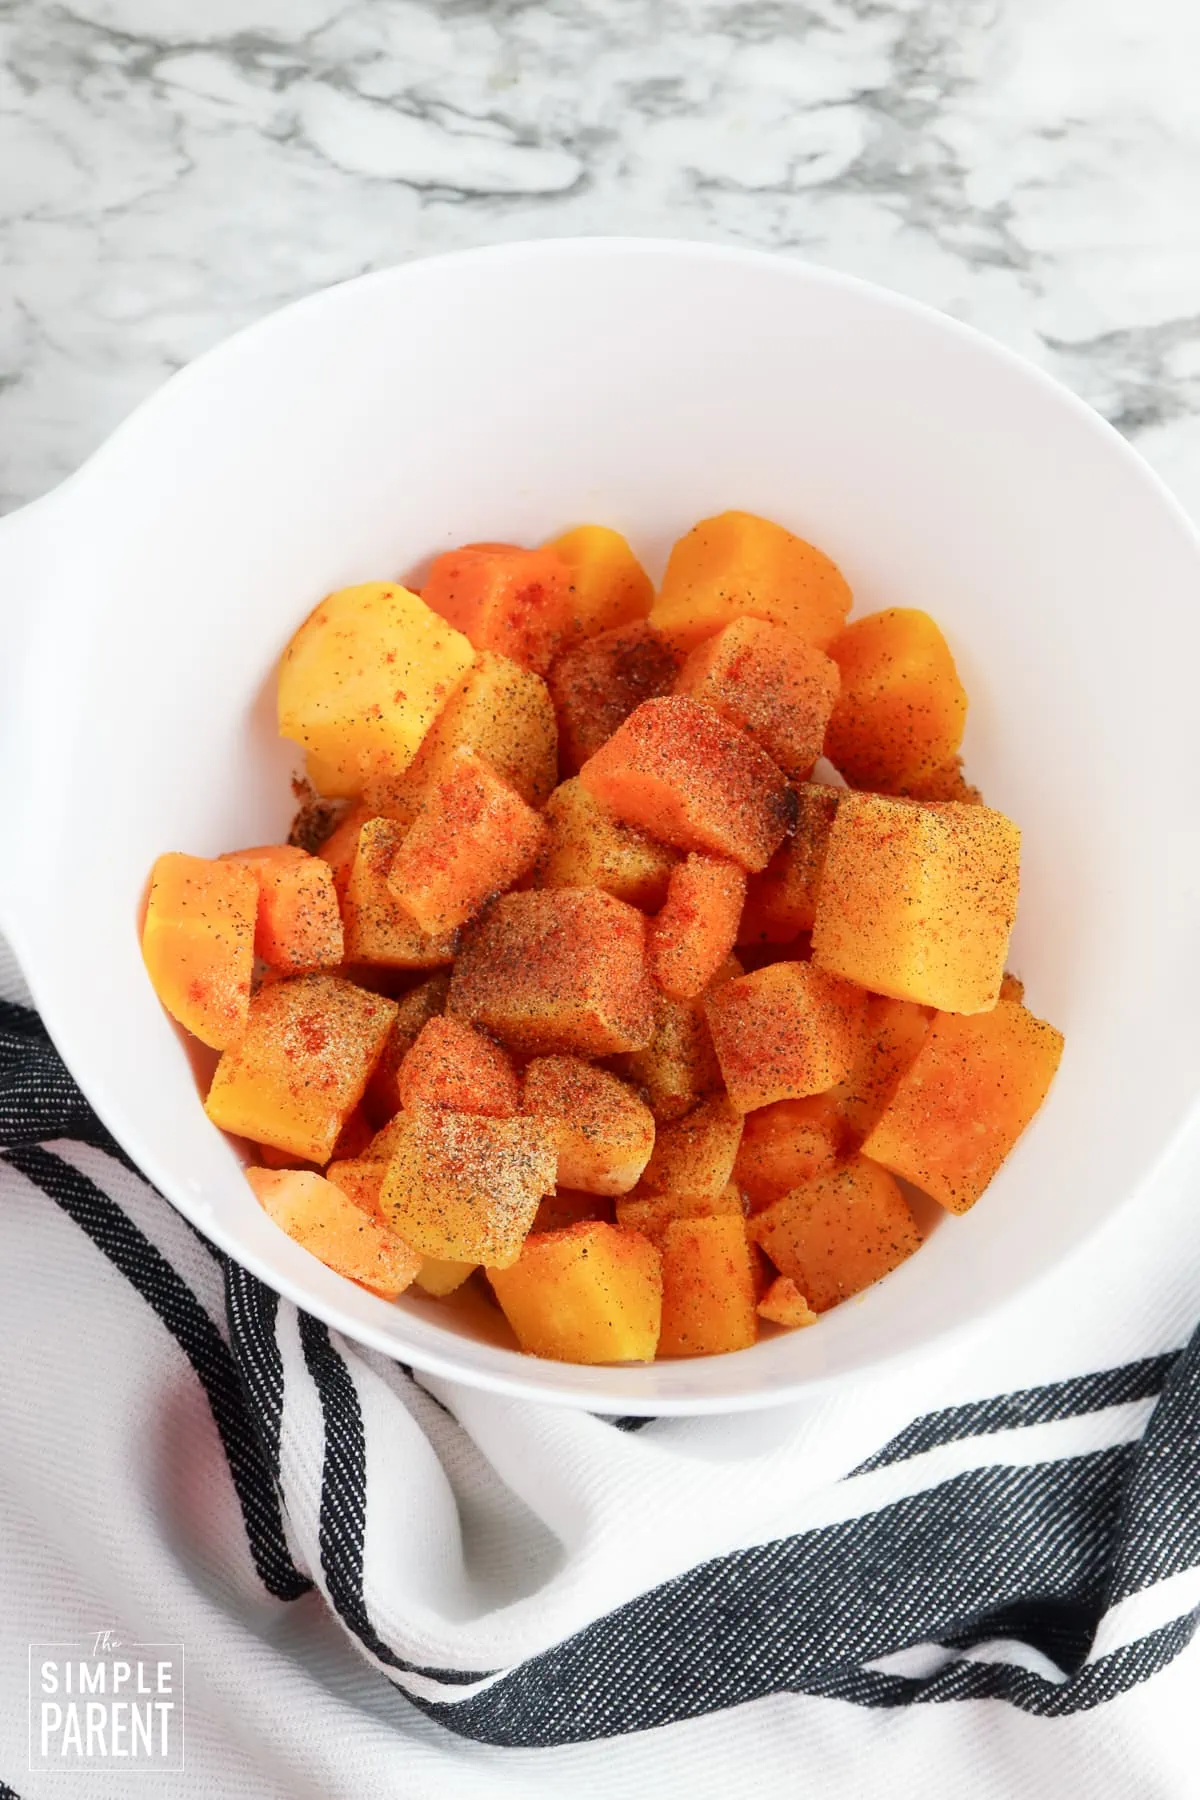 Butternut squash cubes in white mixing bowl